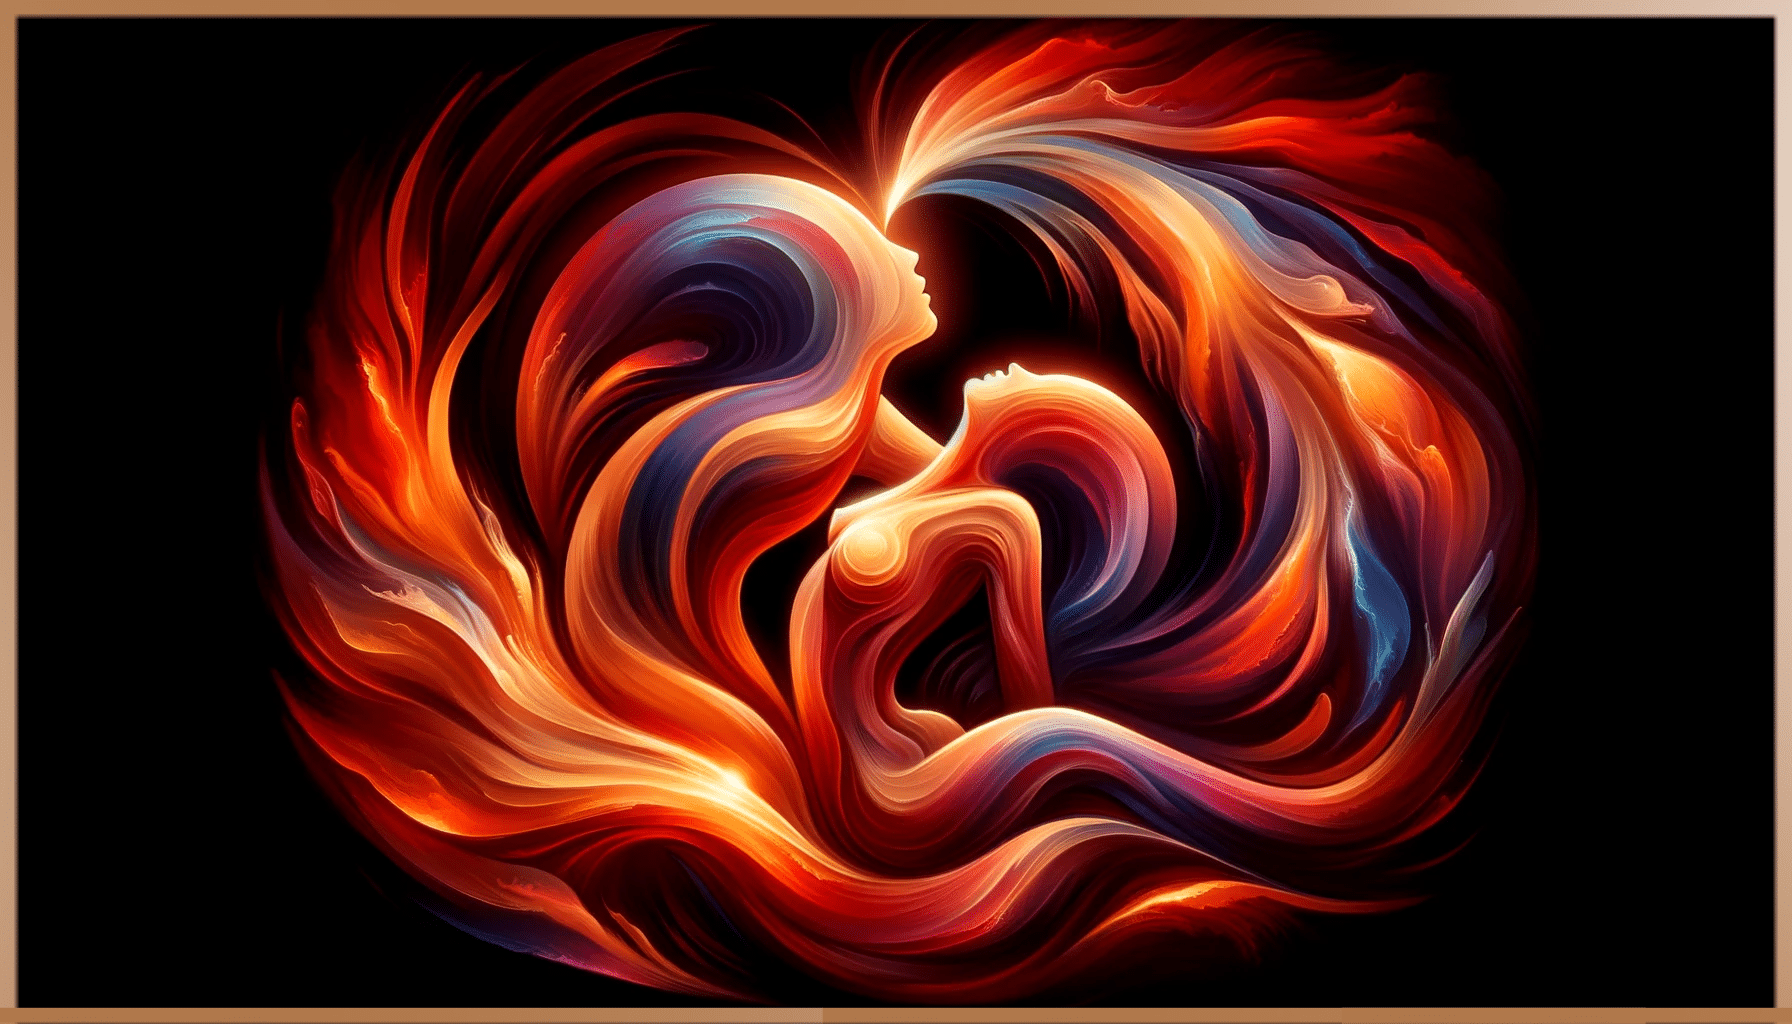 Abstract representation of sexual energy with vibrant swirls of red and blue hues forming silhouettes suggestive of human connection.